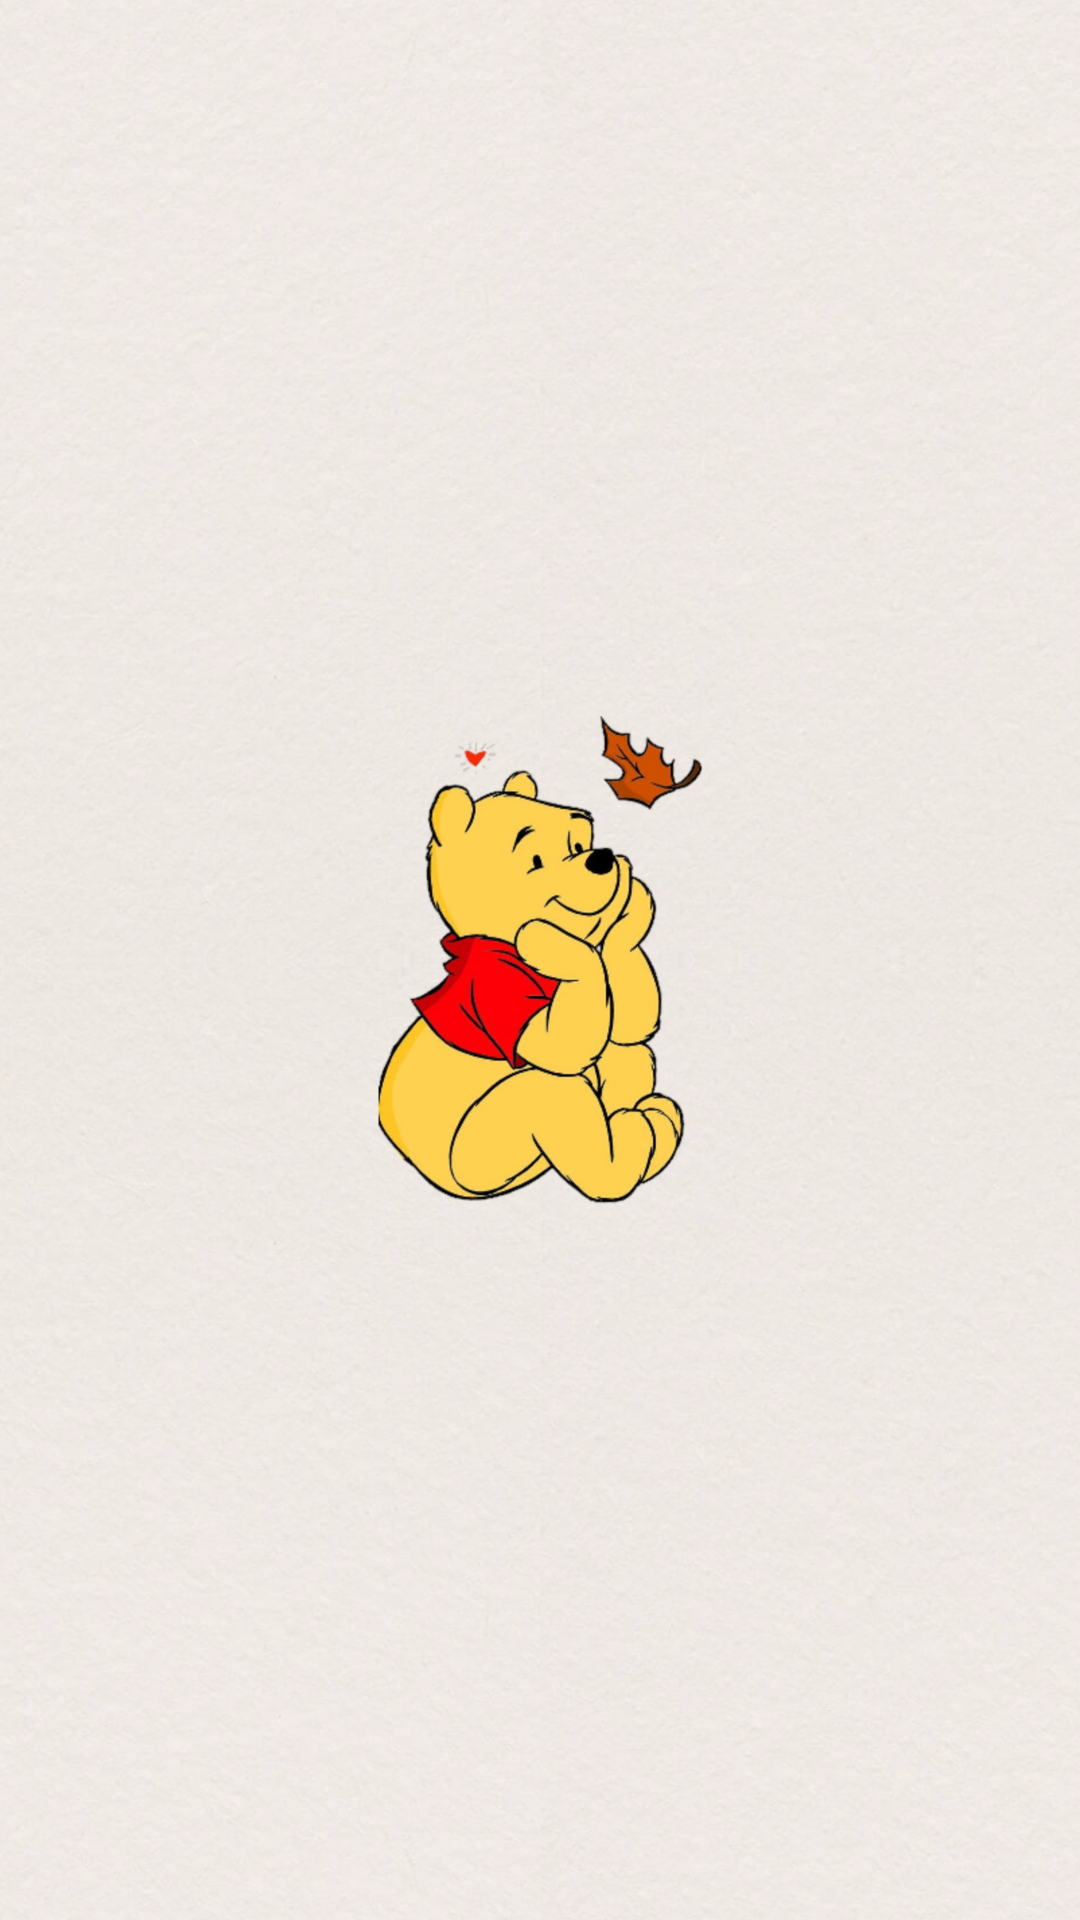 Aesthetic Winnie The Pooh Wallpapers Wallpaper Cave 